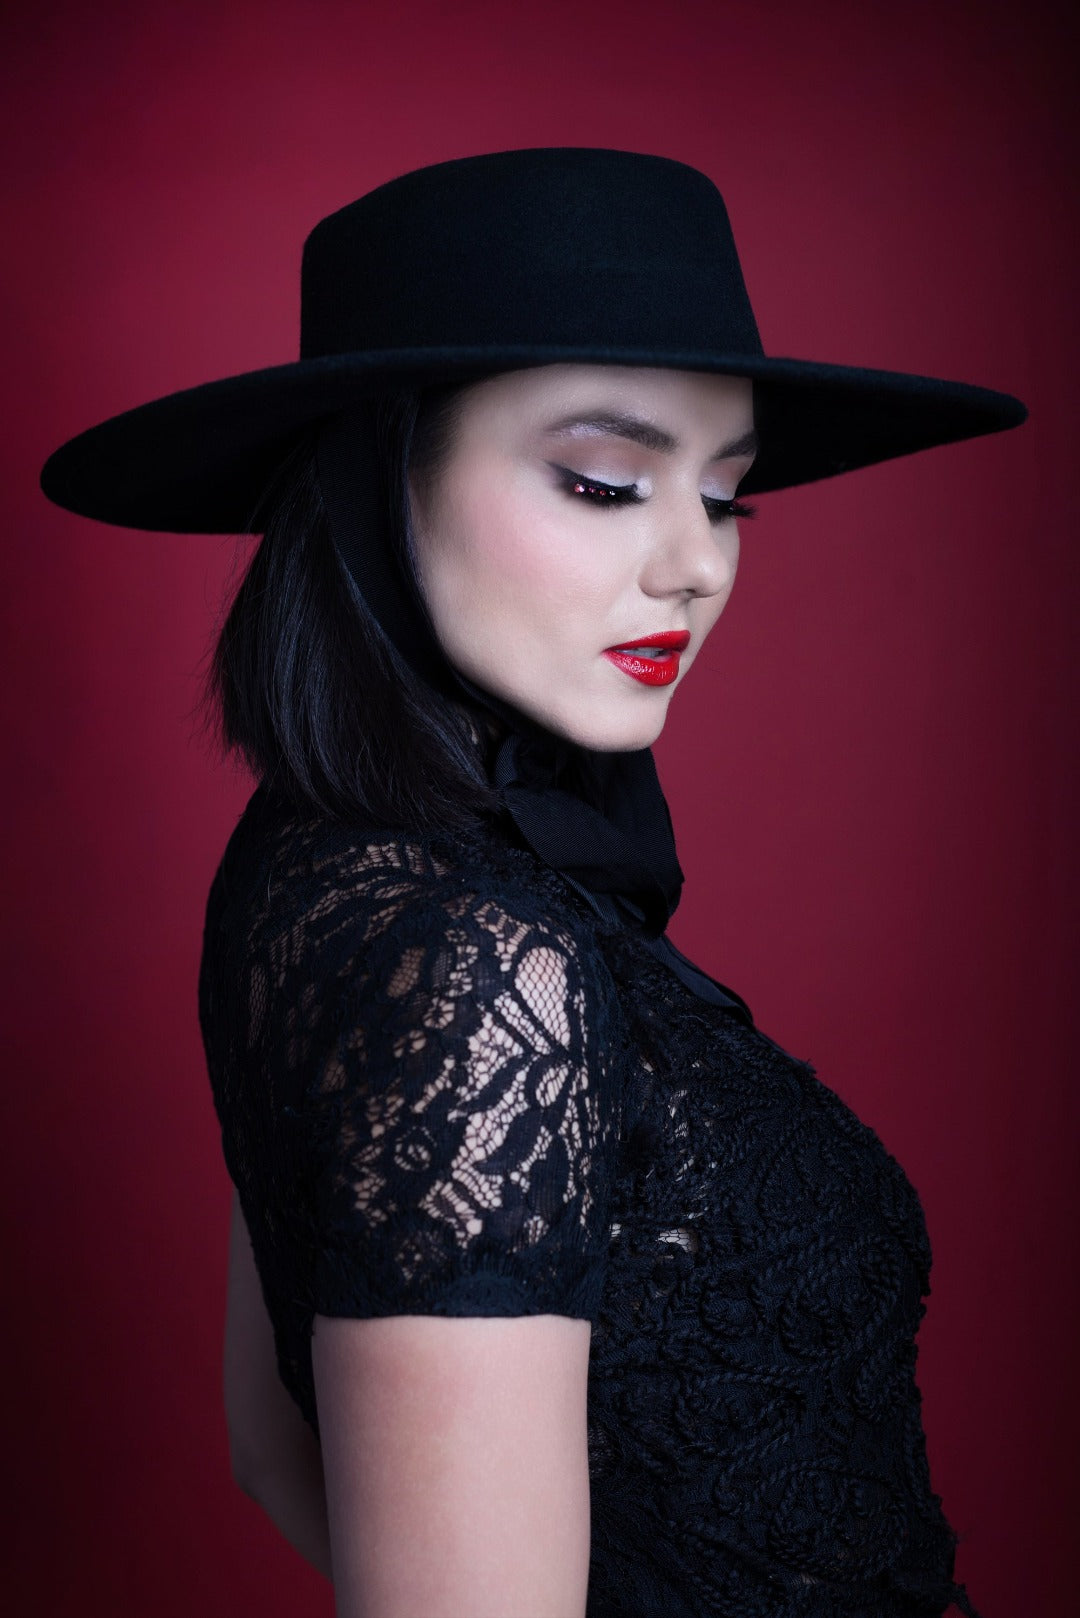 A model posing in side profile against a red backdrop while wearing the American Gothic wide brim hat in black.